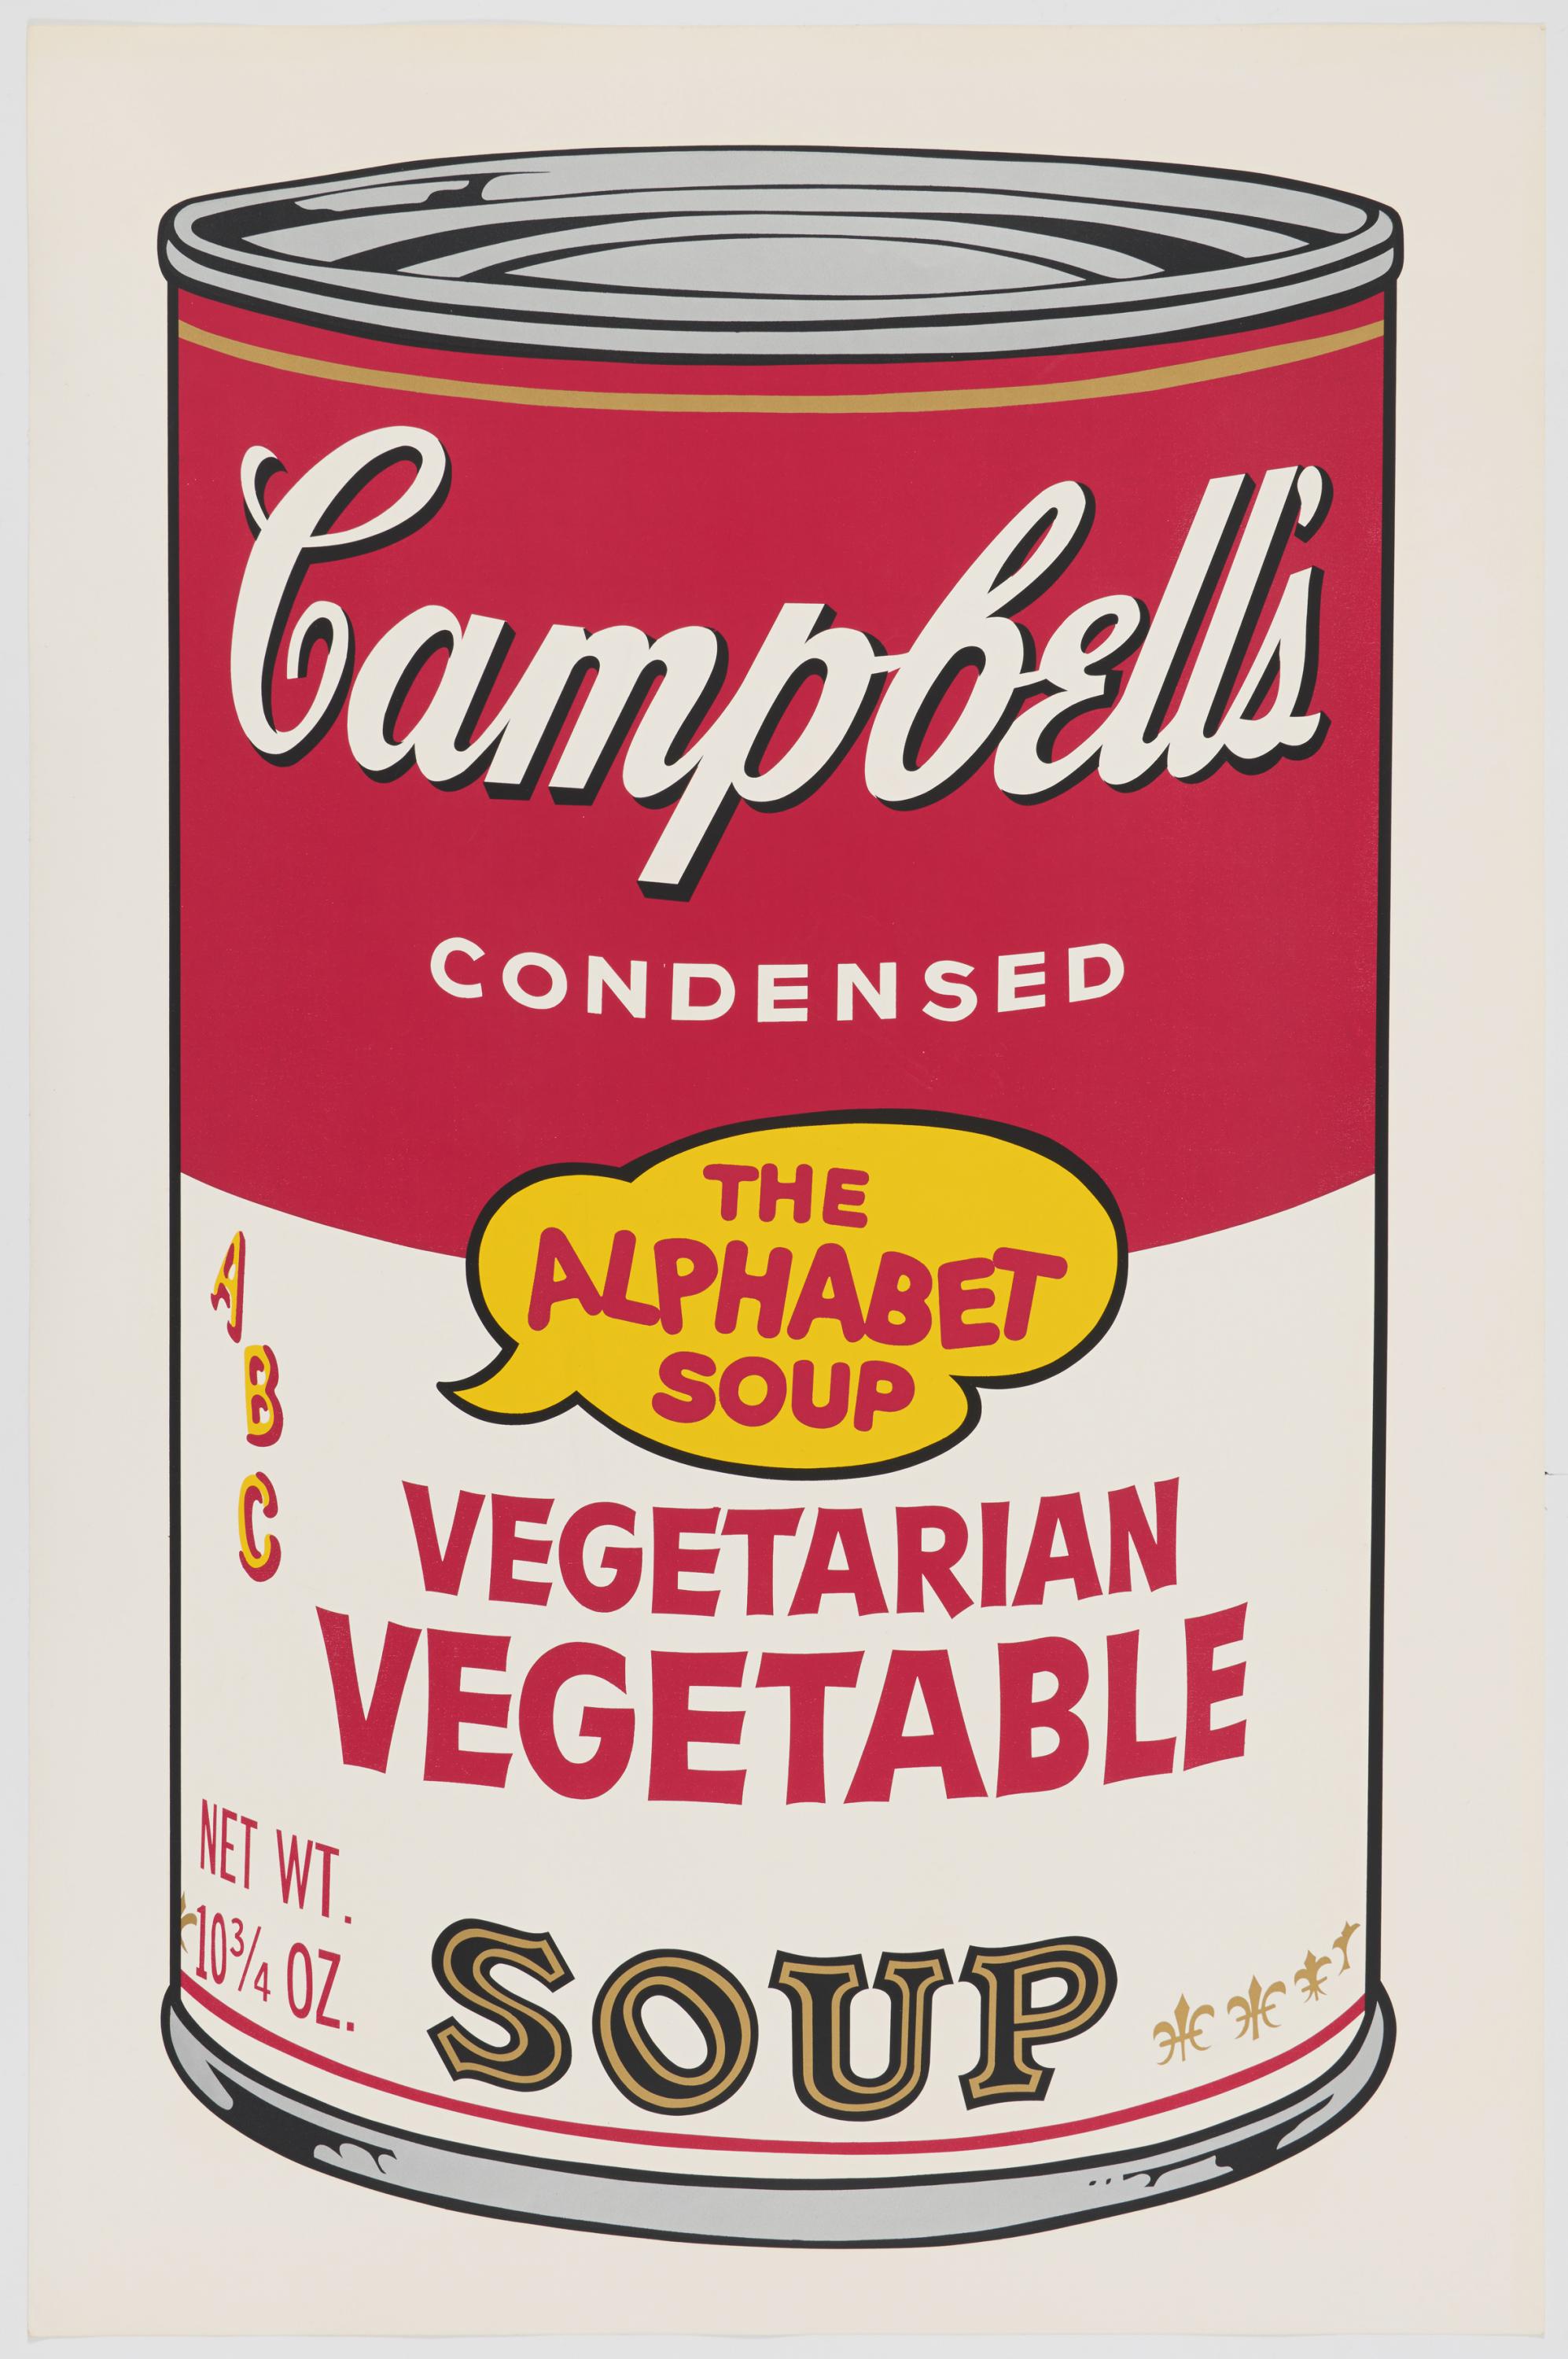 Andy Warhol: Campbell's Soup II (Vegetarian Vegetable Soup) - Image 2 of 3